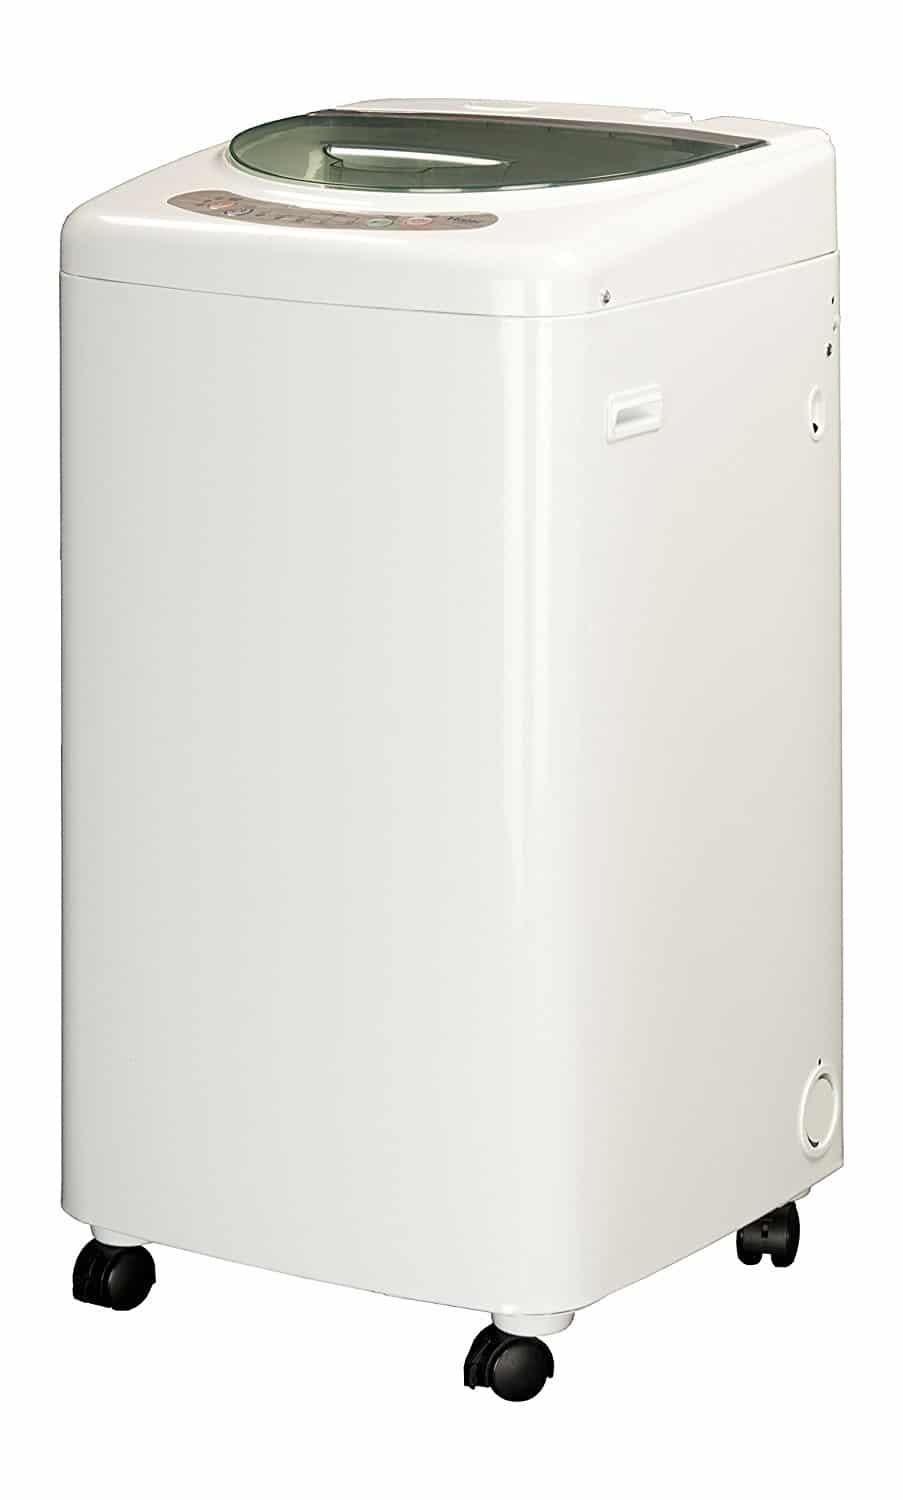 Best Portable Washing Machines 2018: Hairer Small Compact Washer Review